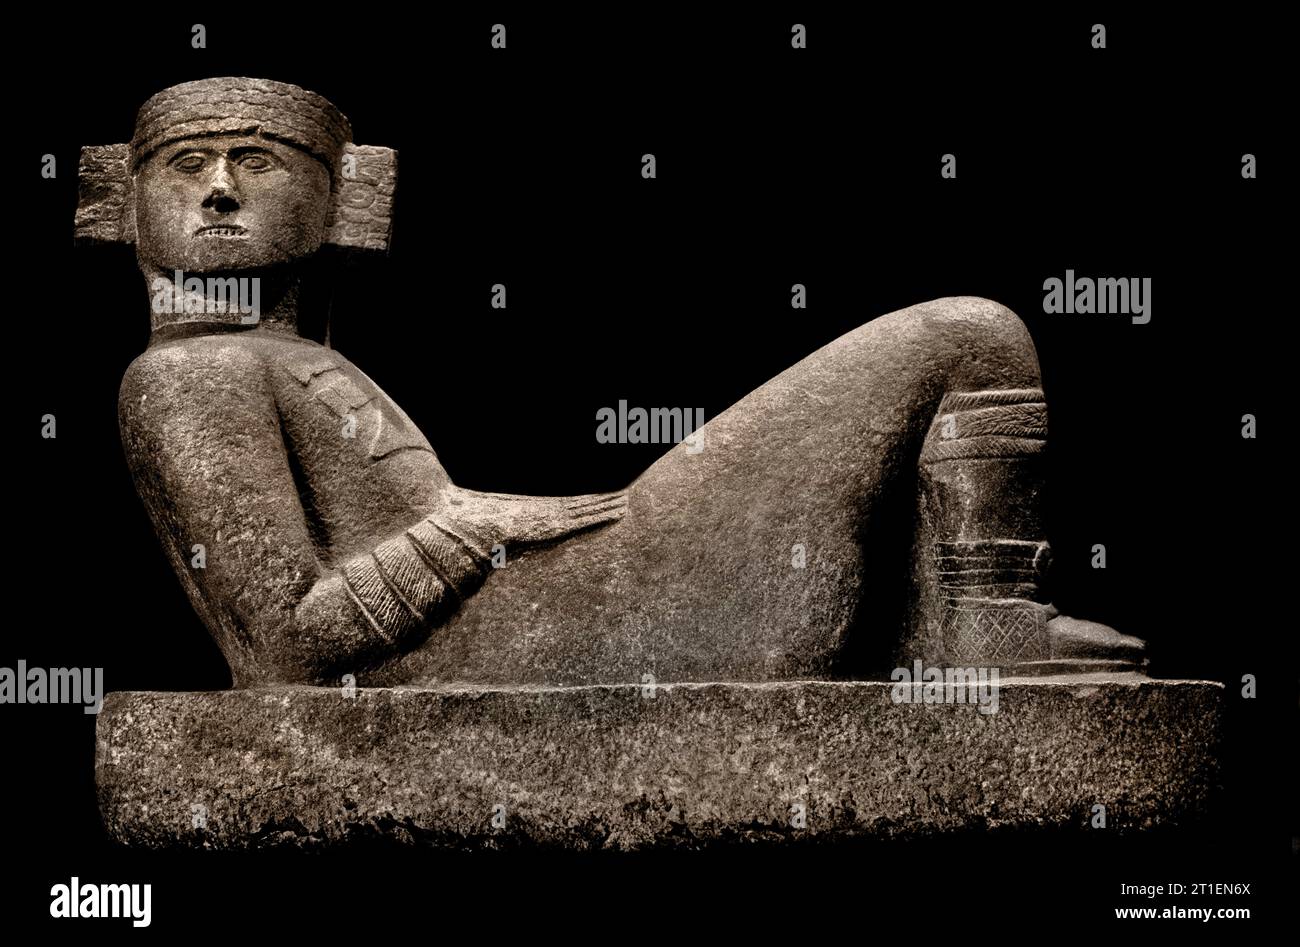 Pre-Columbian mesoamerican stone statue known as Chac-Mool at the National Anthropology Museum in Mexico City Stock Photo